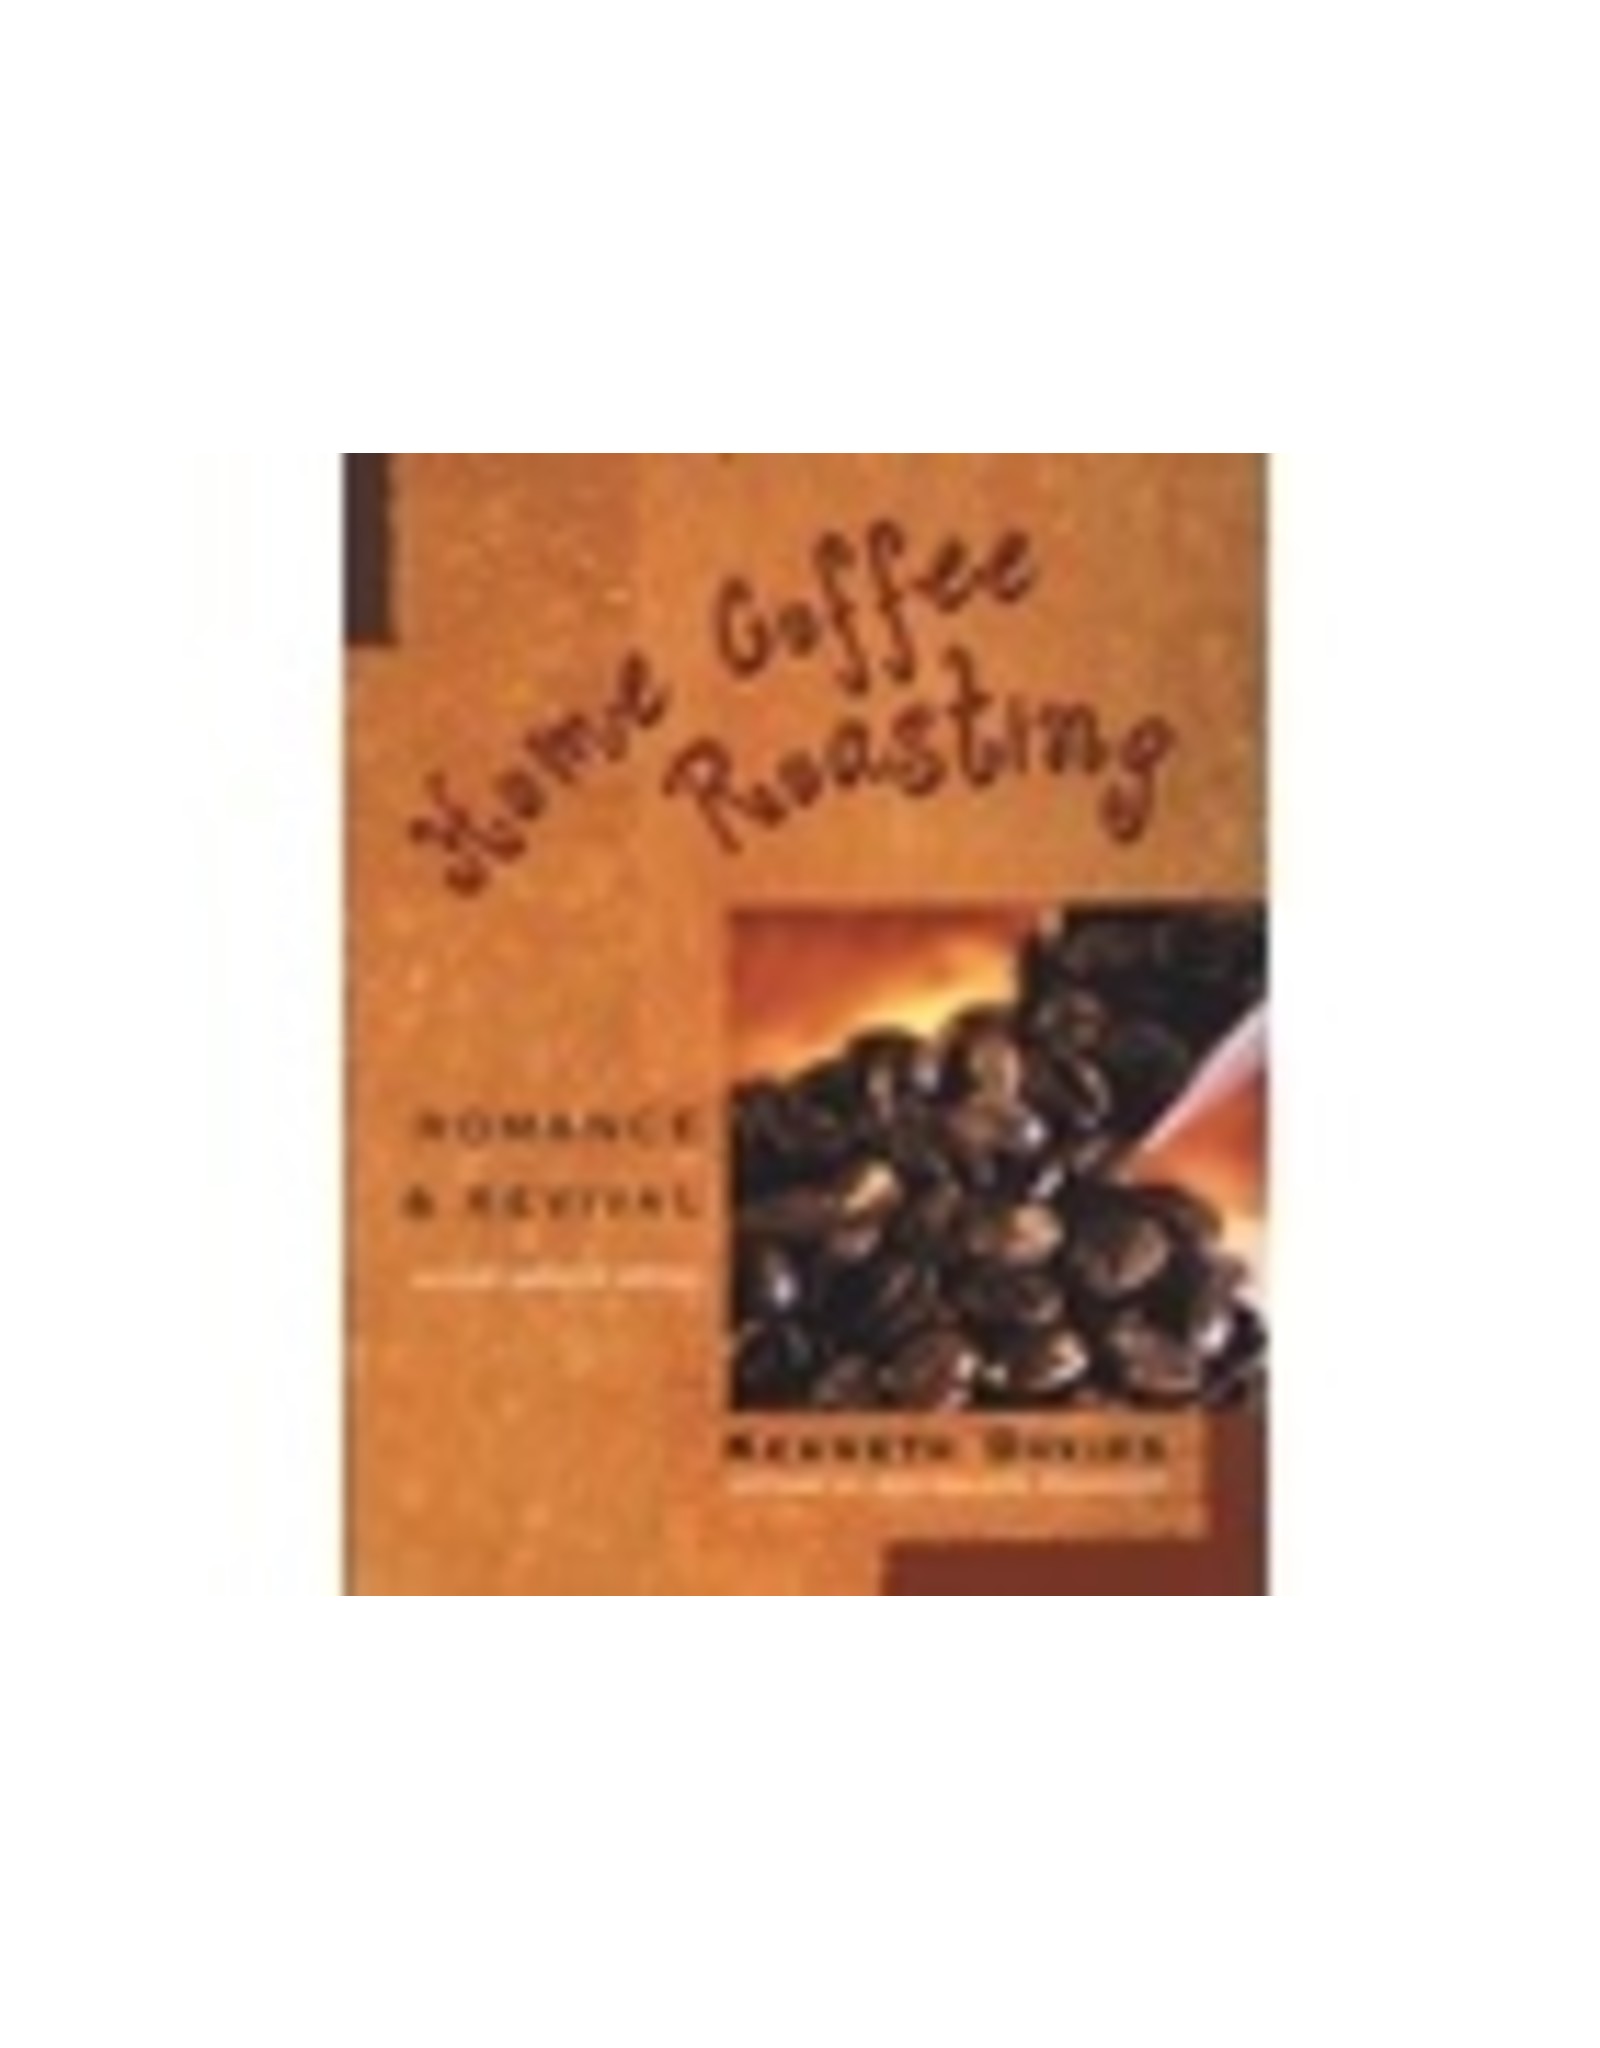 Home Coffee Roasting: Romance and Rival  (book)